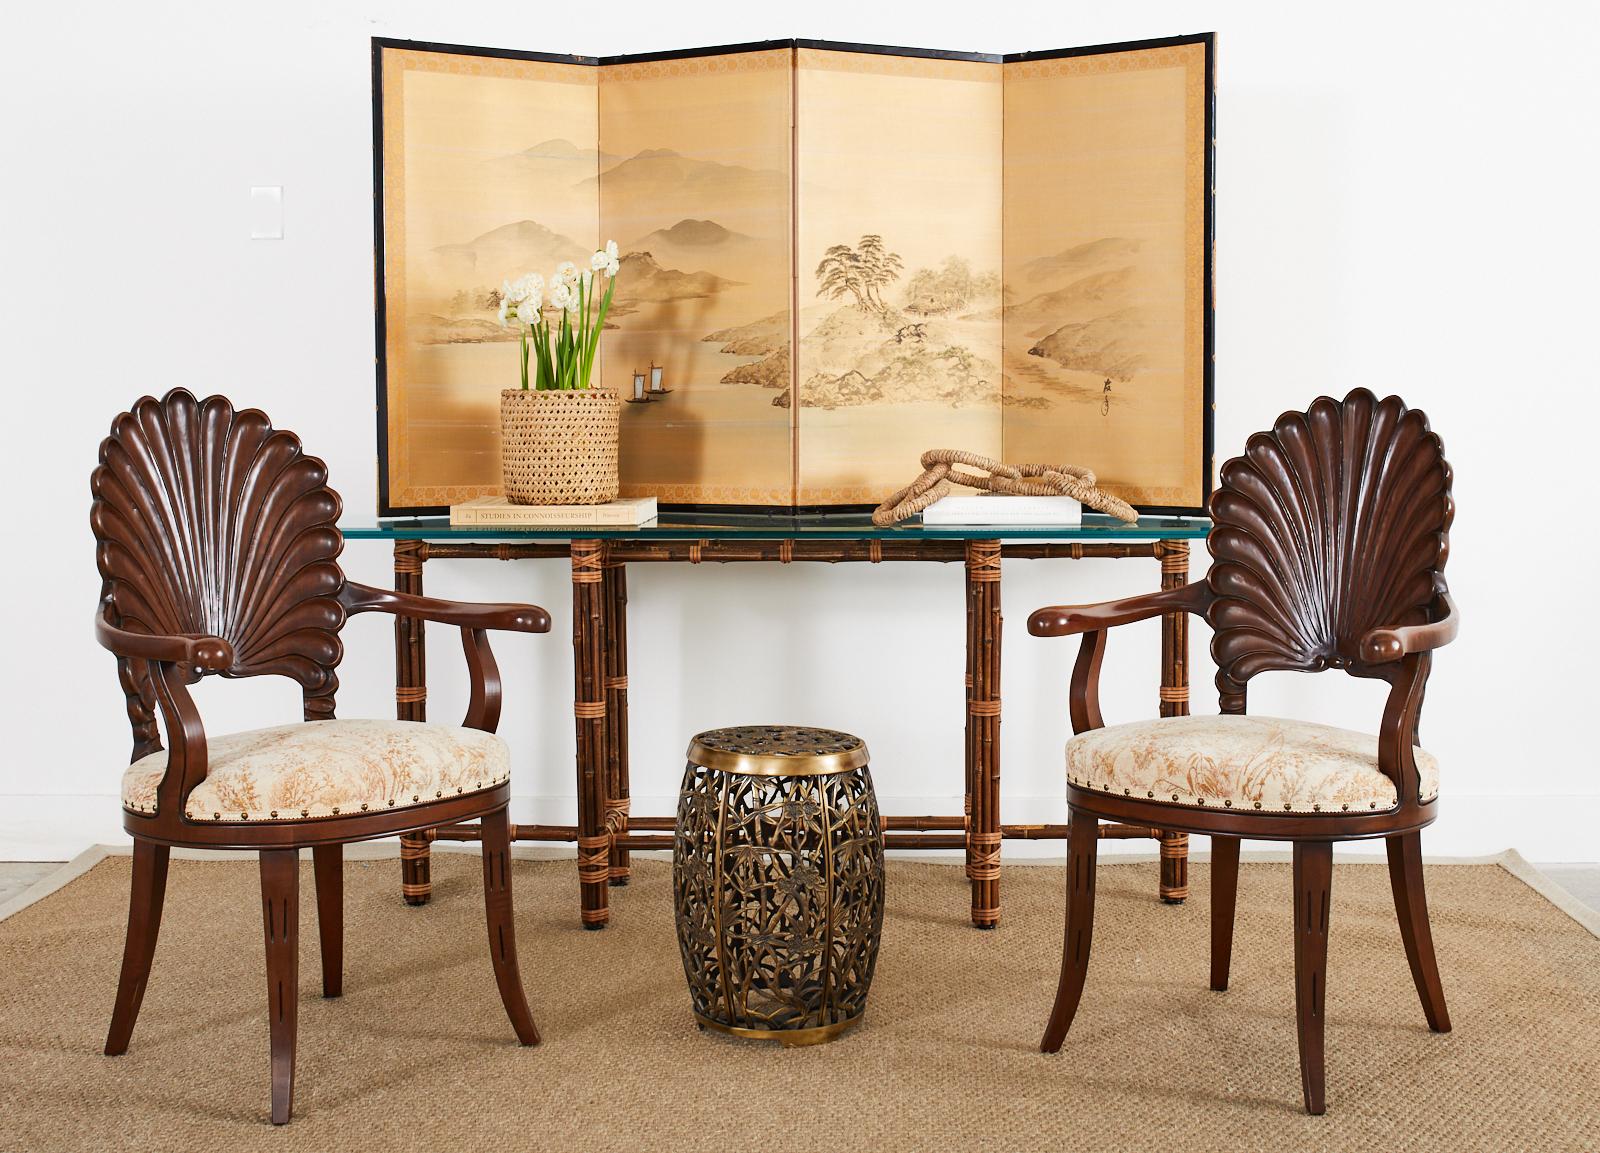 Genuine McGuire bamboo rattan style sofa table or console table made in the California organic modern style. The table features a large iron frame painted golden gate orange for authenticity. The frame is entirely covered with dark bamboo poles